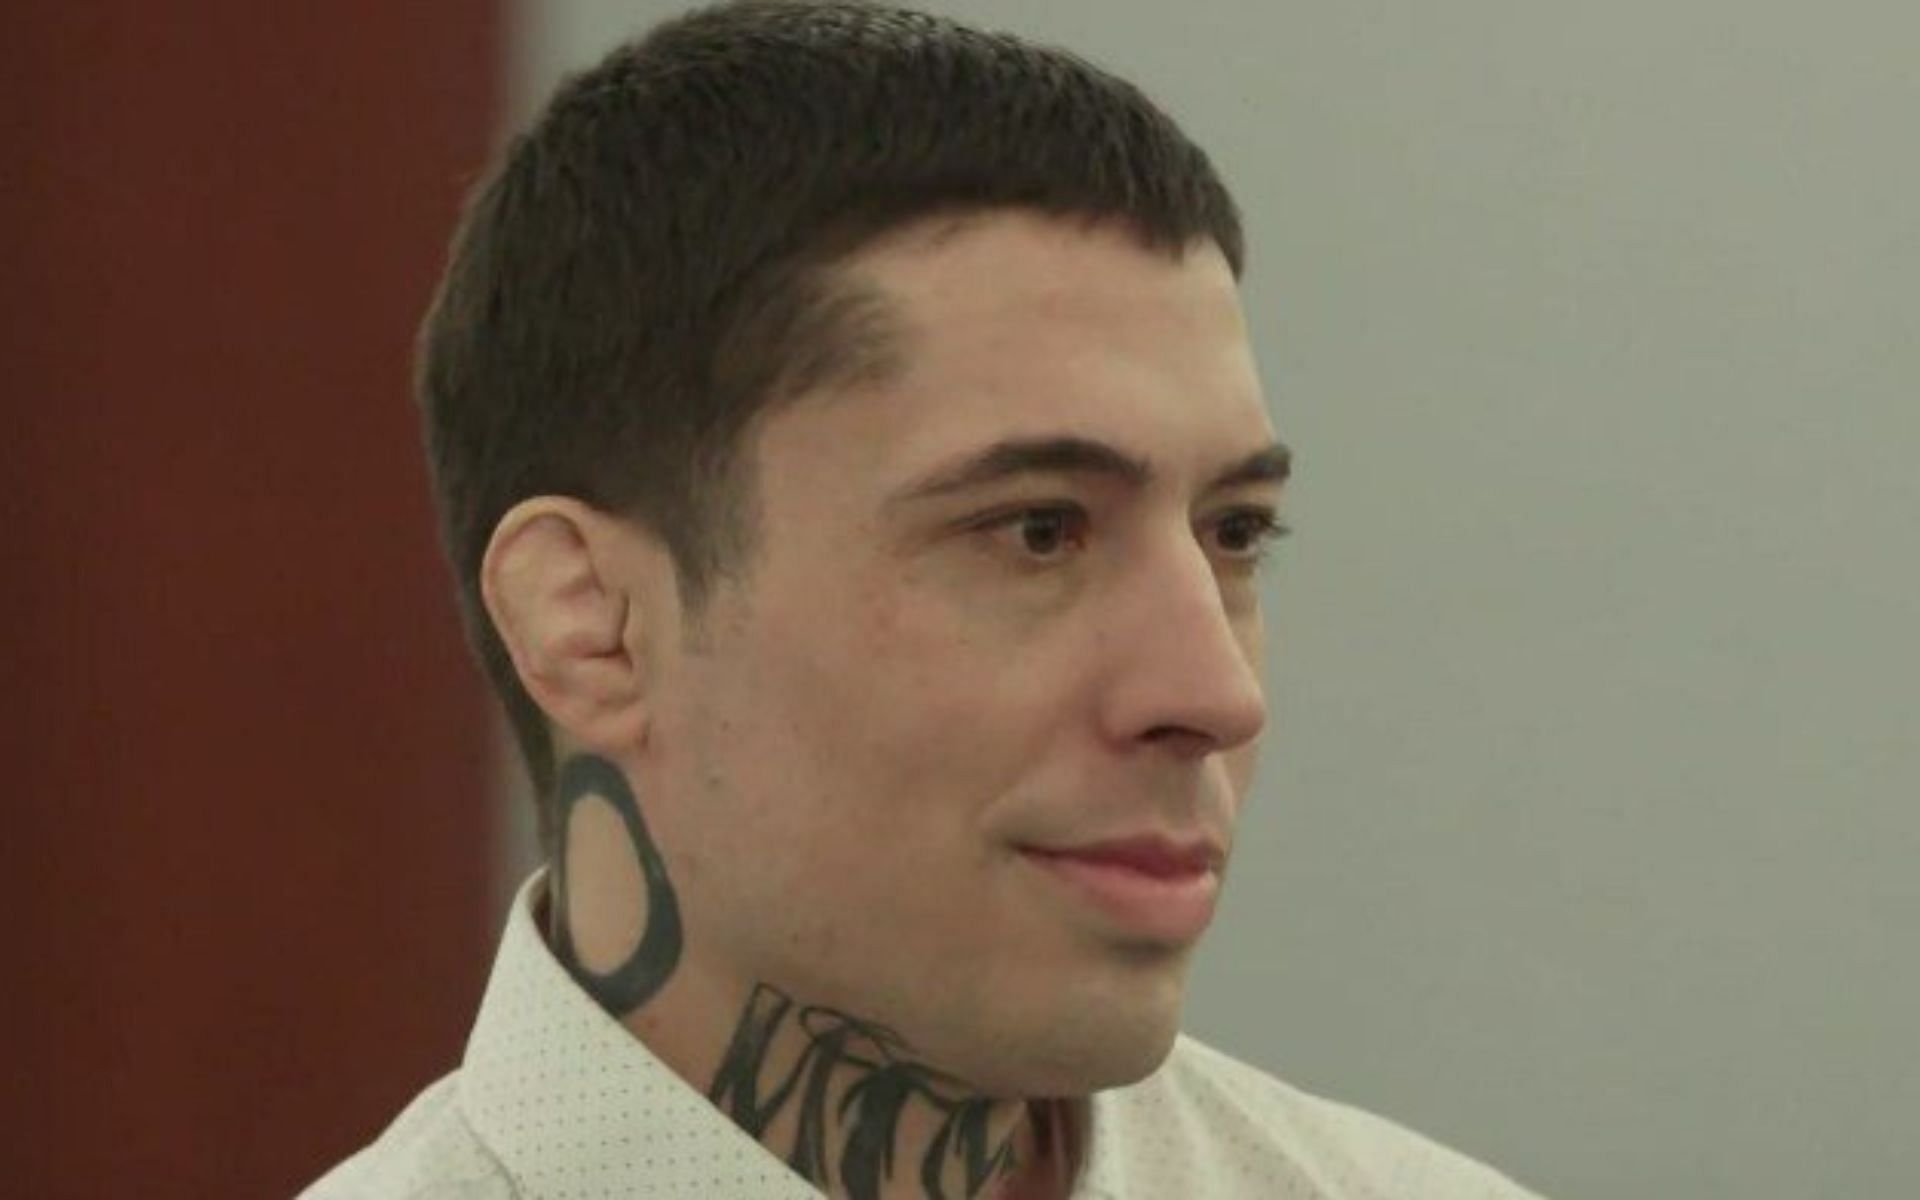 UFC fighter What crimes has MMA fighter War Machine committed? Here is